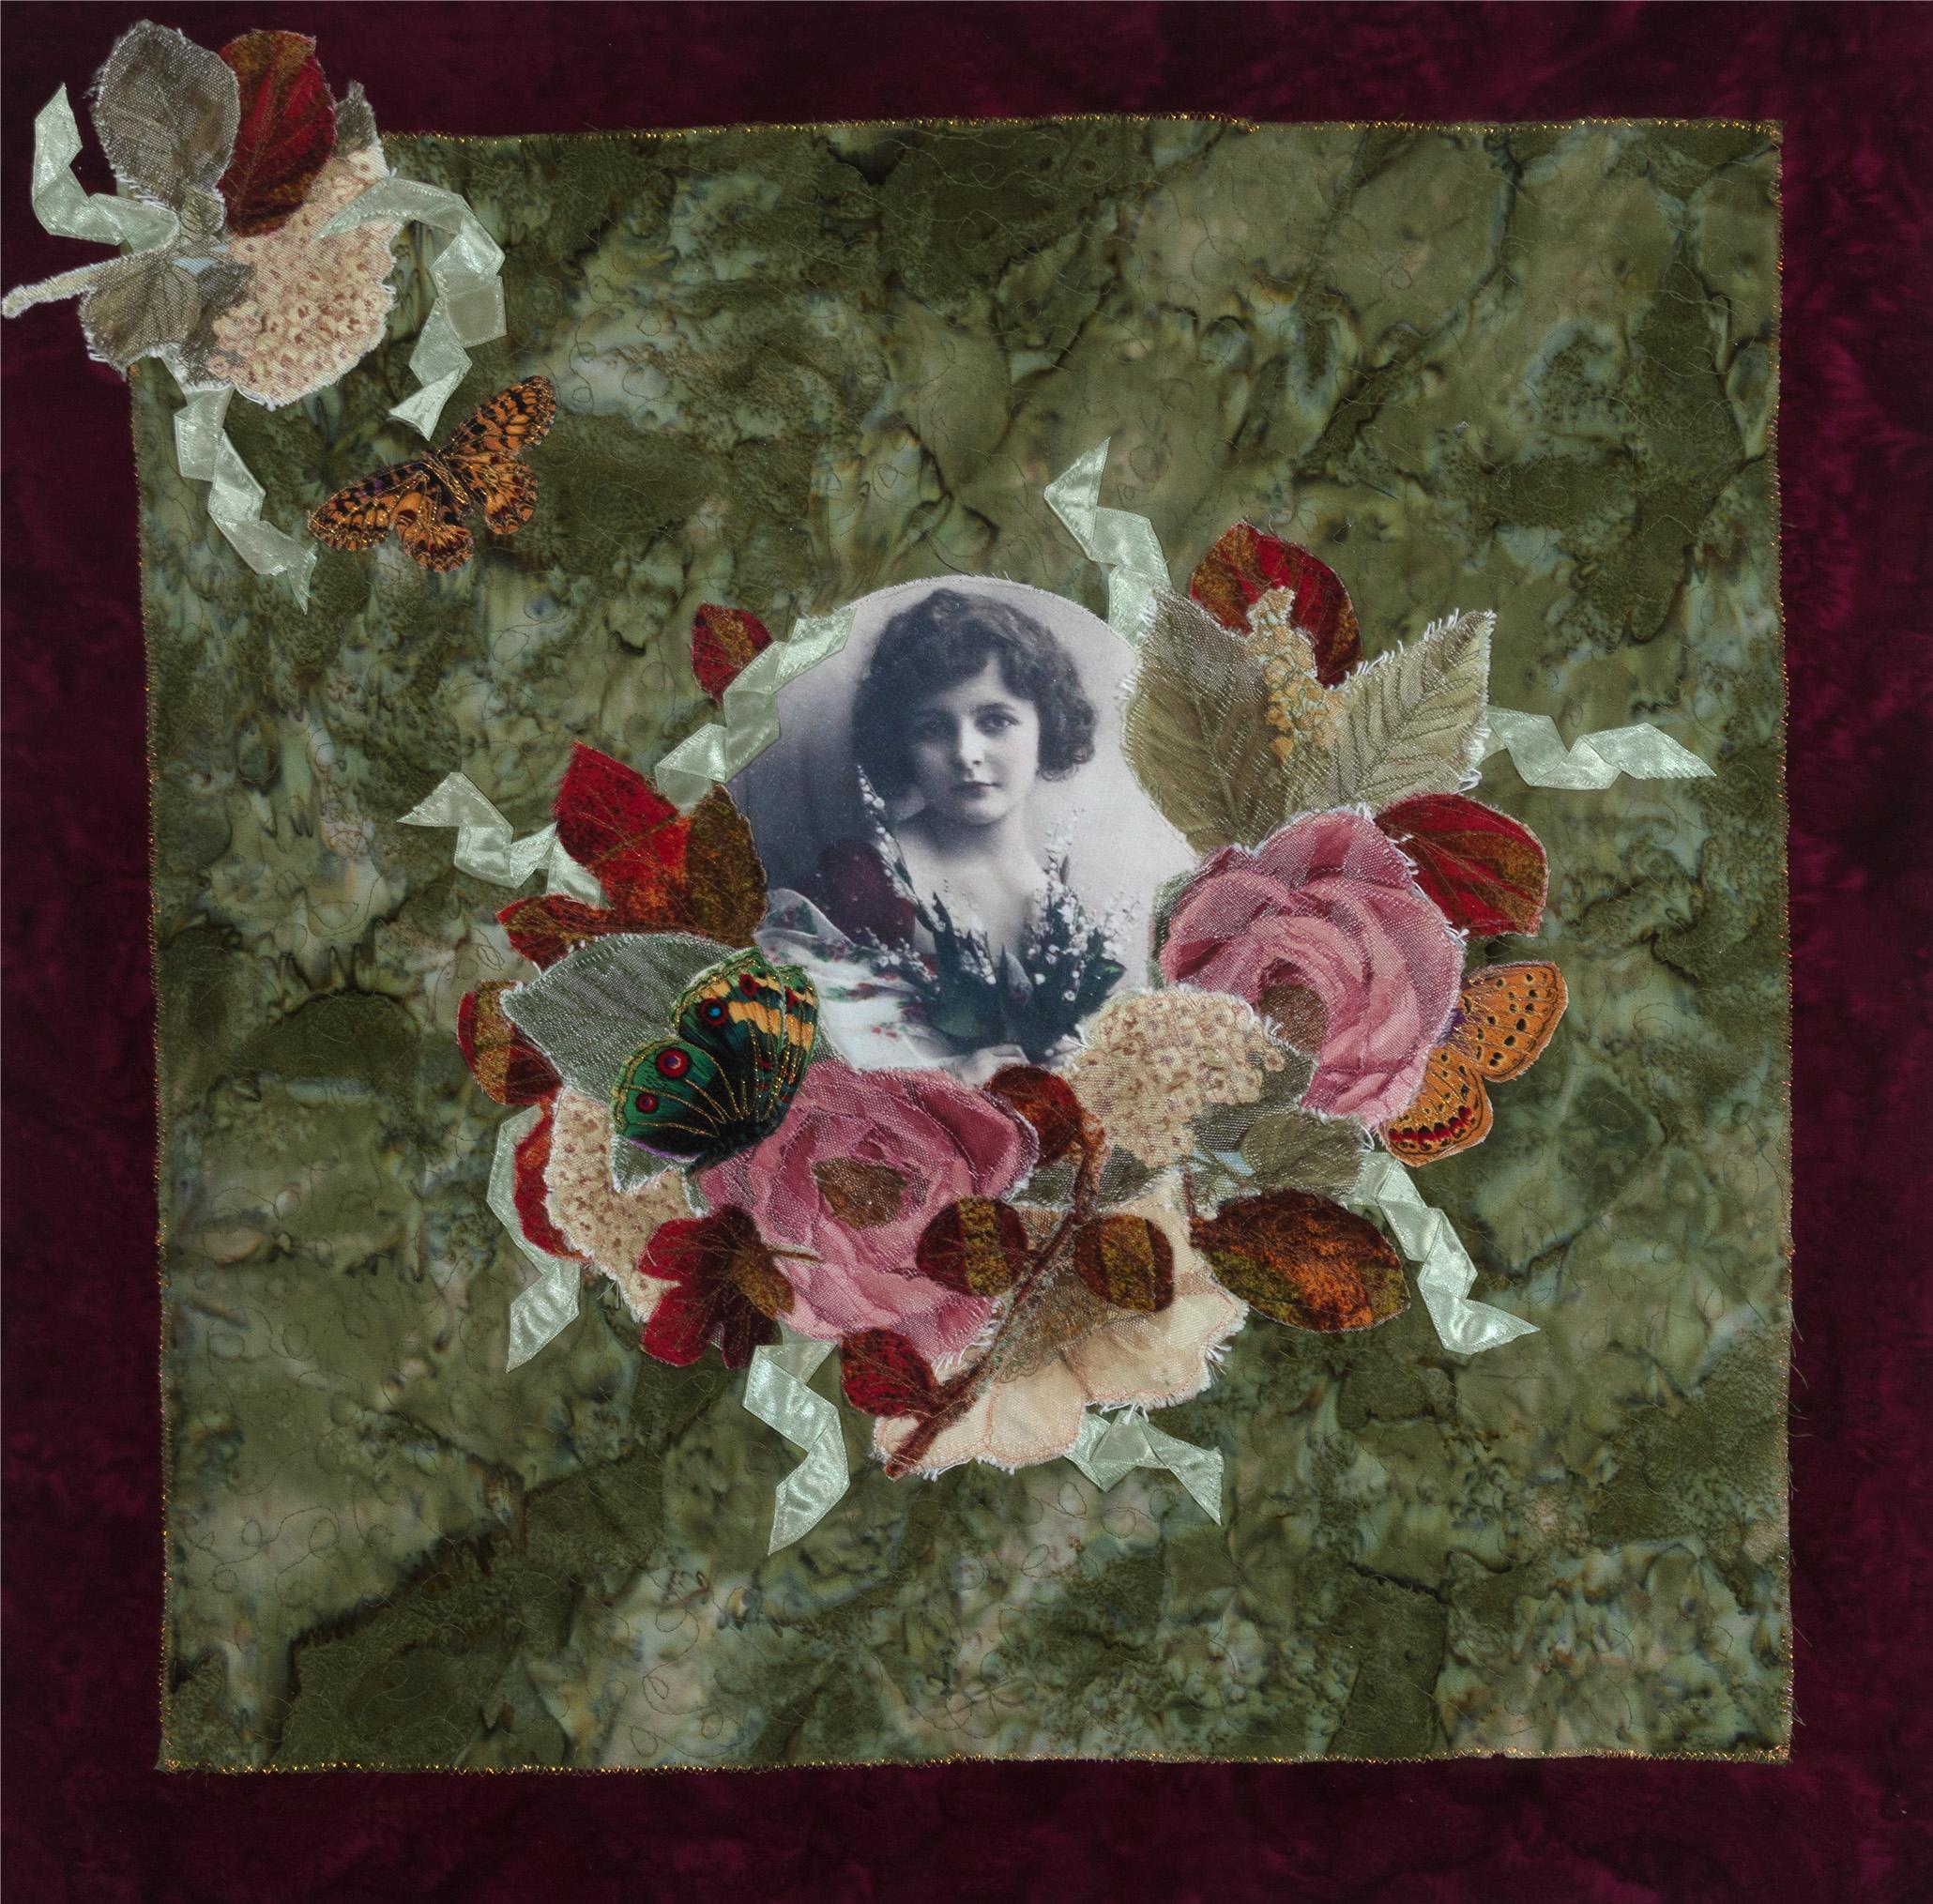 A floral arrangement made of a variety of textiles, surrounding a portrait in the center. Portrait is of a woman in a black and white vignette. Quilted together with a golden and glittery thread. Artist signed this piece in the lower left.